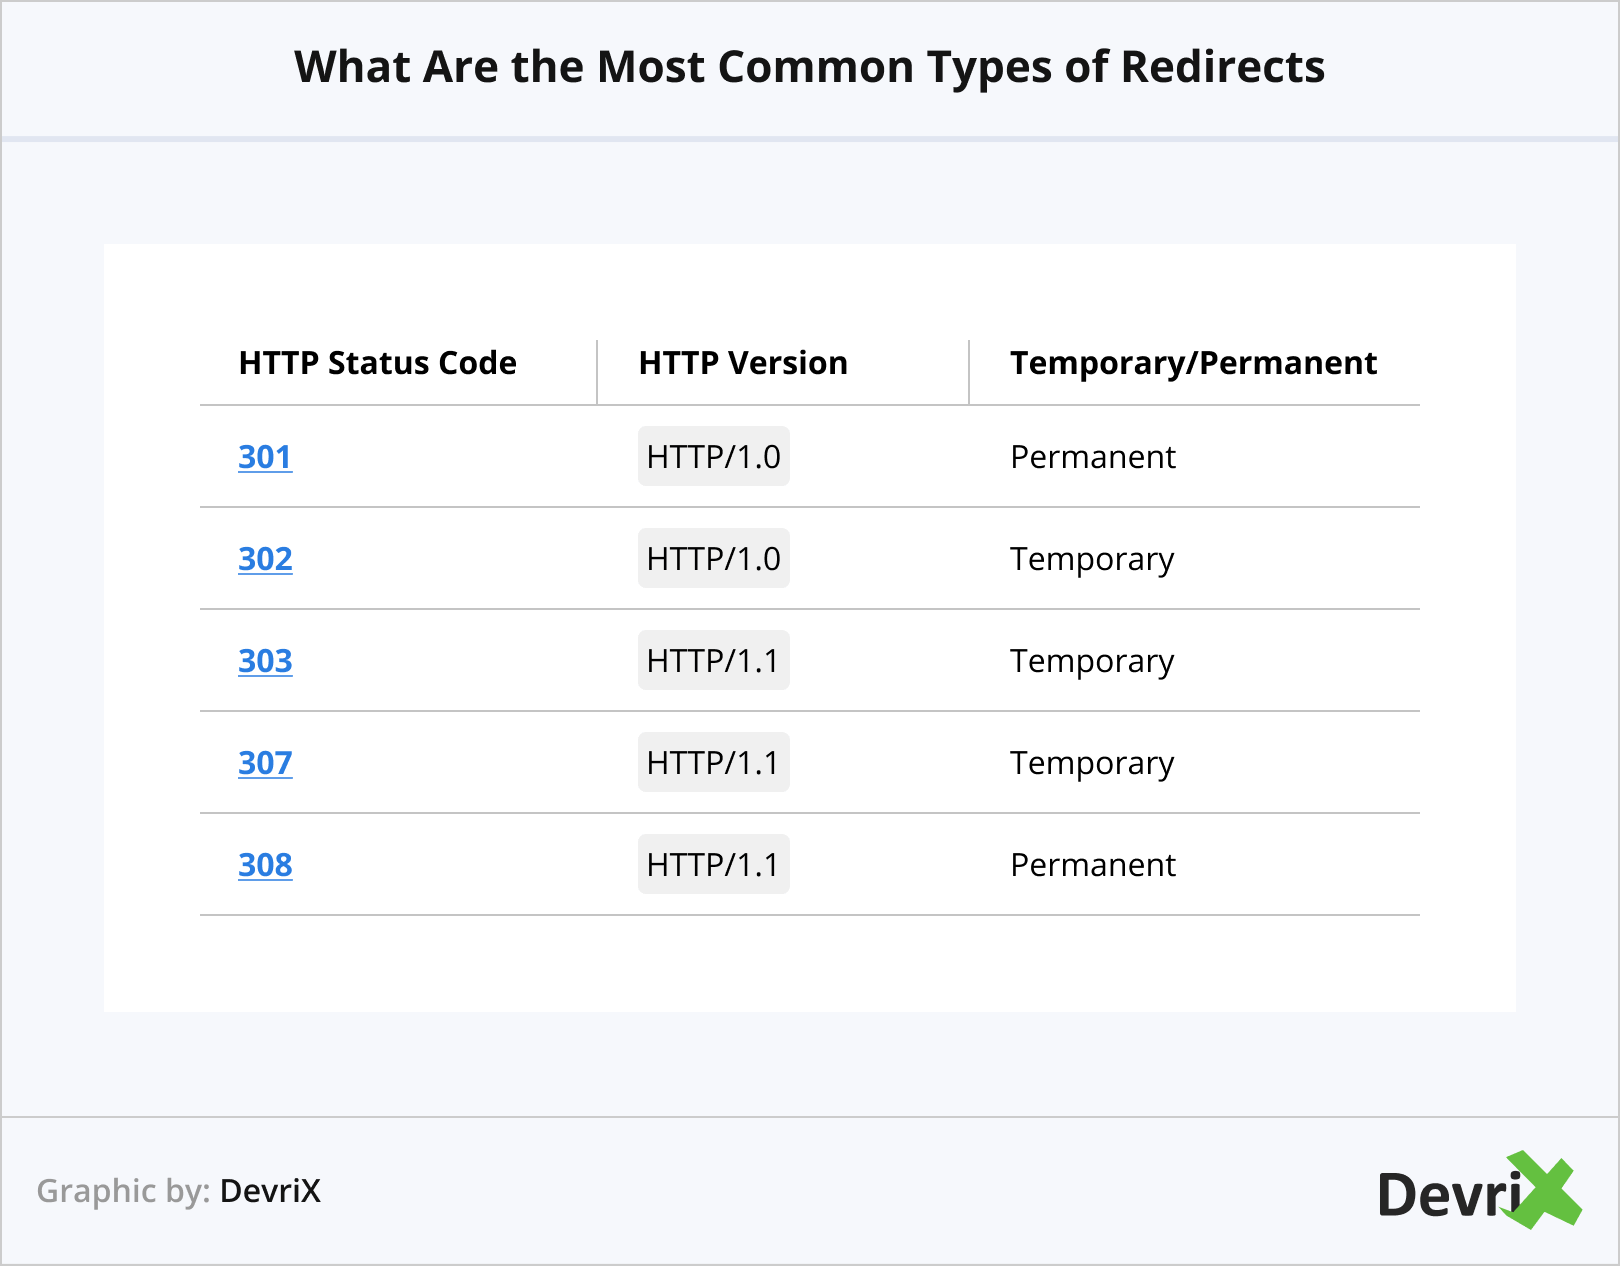 What Are the Most Common Types of Redirects